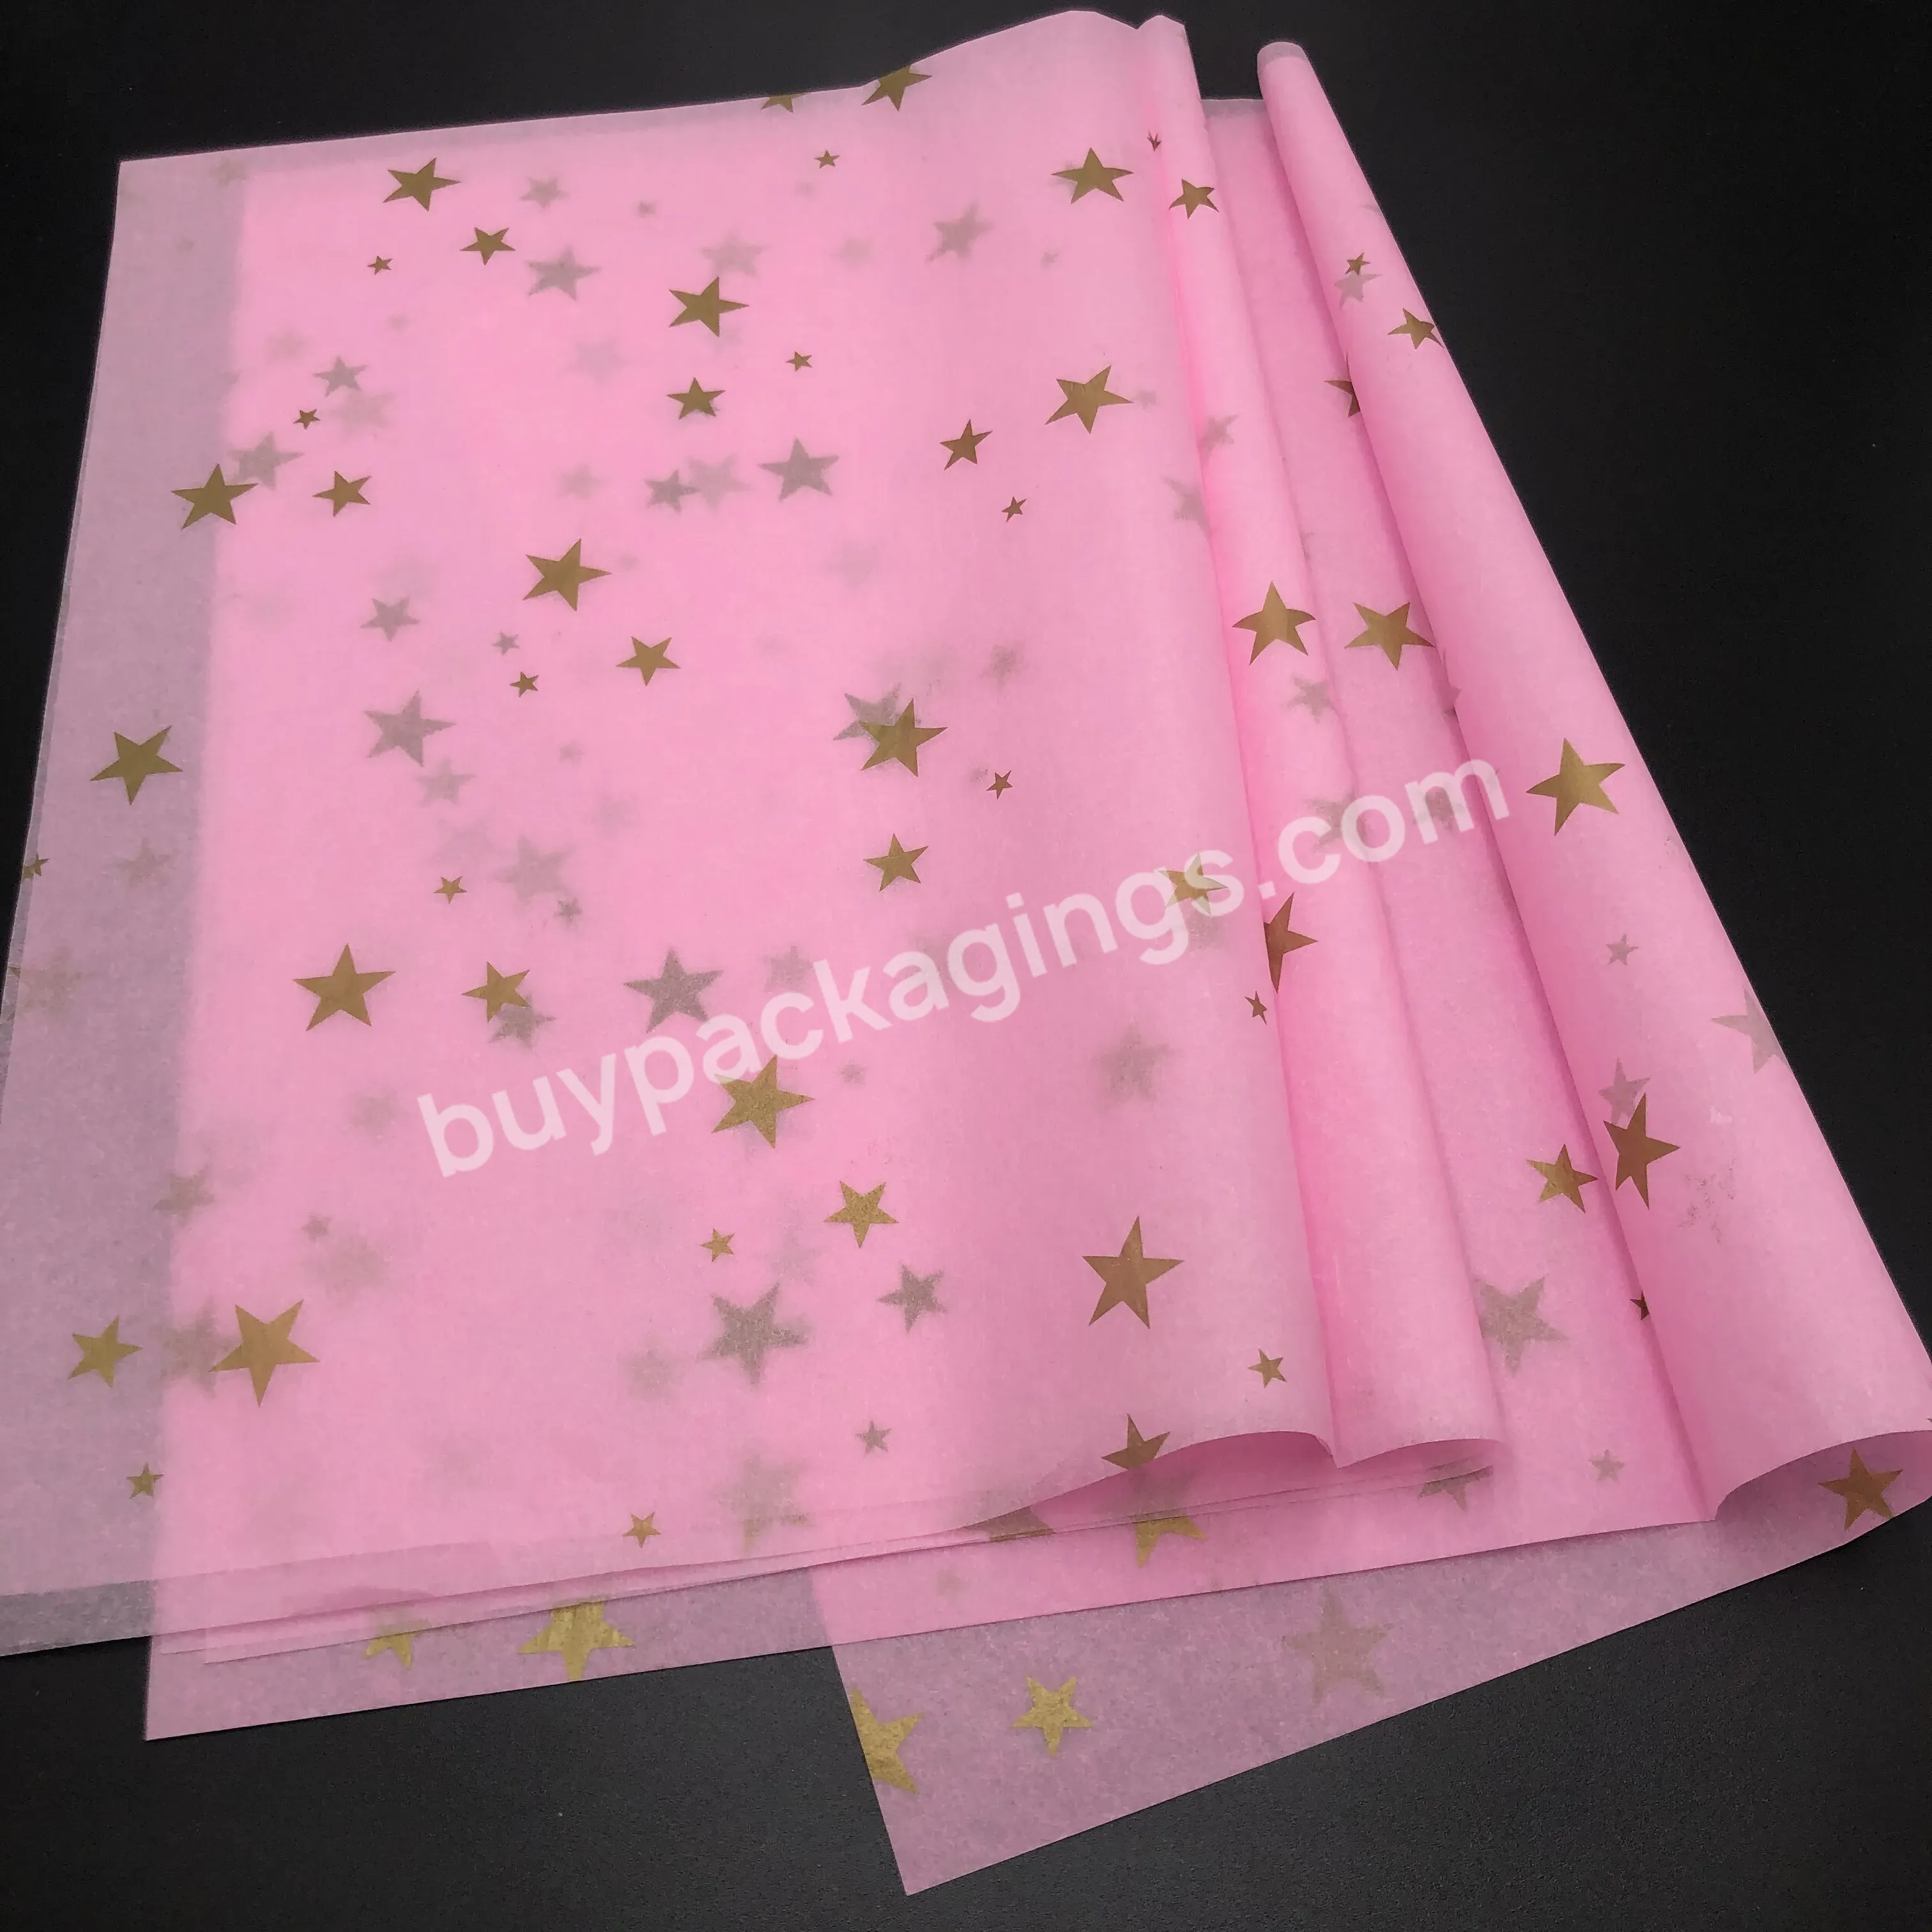 17g Stock Acid Free Tissue Paper With Gold Star Printed Logo Wrapping Paper/mf Acid Free Tissue Paper - Buy Stock Tissue Paper,Wrapping Paper,17g Tissue Paper.